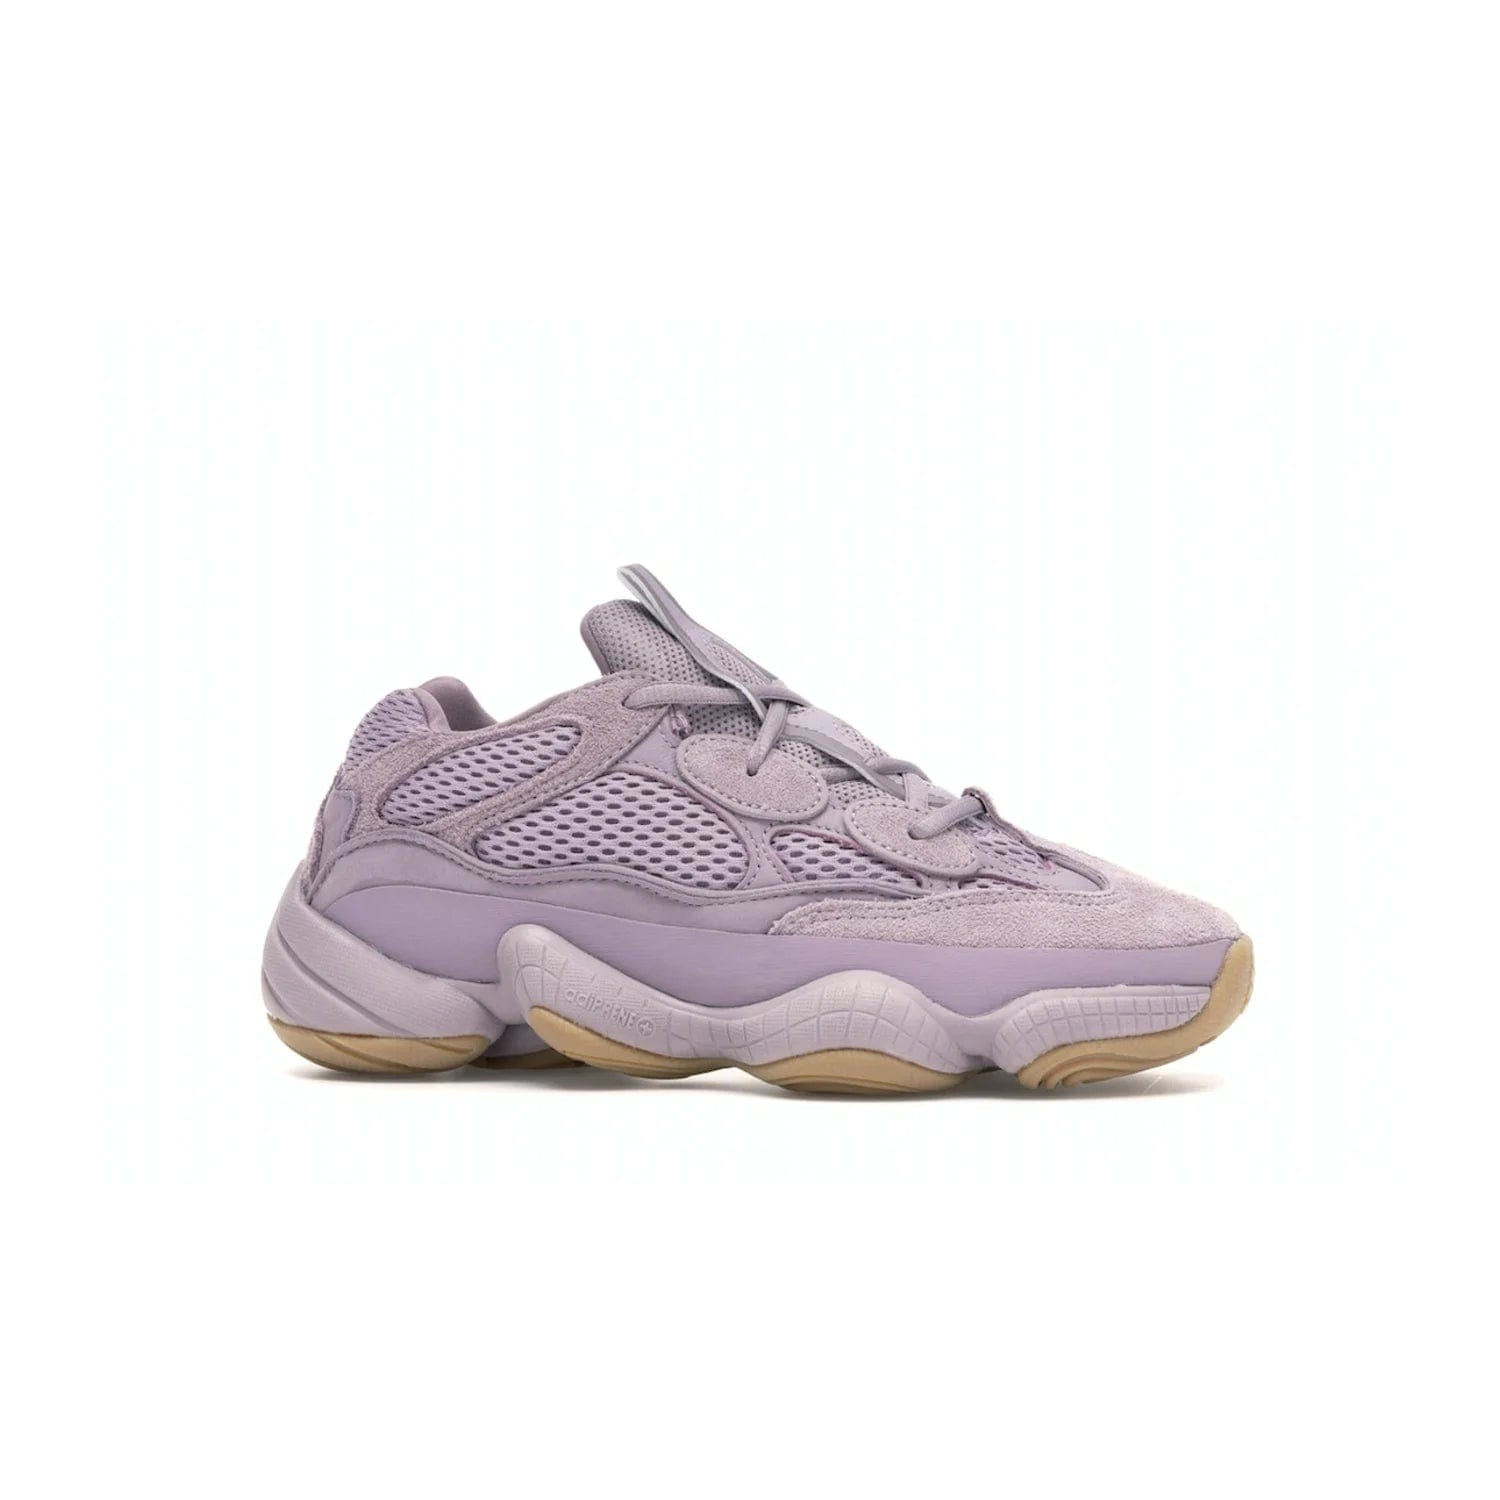 adidas Yeezy 500 Soft Vision - Image 2 - Only at www.BallersClubKickz.com - New adidas Yeezy 500 Soft Vision sneaker featuring a combination of mesh, leather, and suede in a classic Soft Vision colorway. Gum rubber outsole ensures durability and traction. An everyday sneaker that stands out from the crowd.